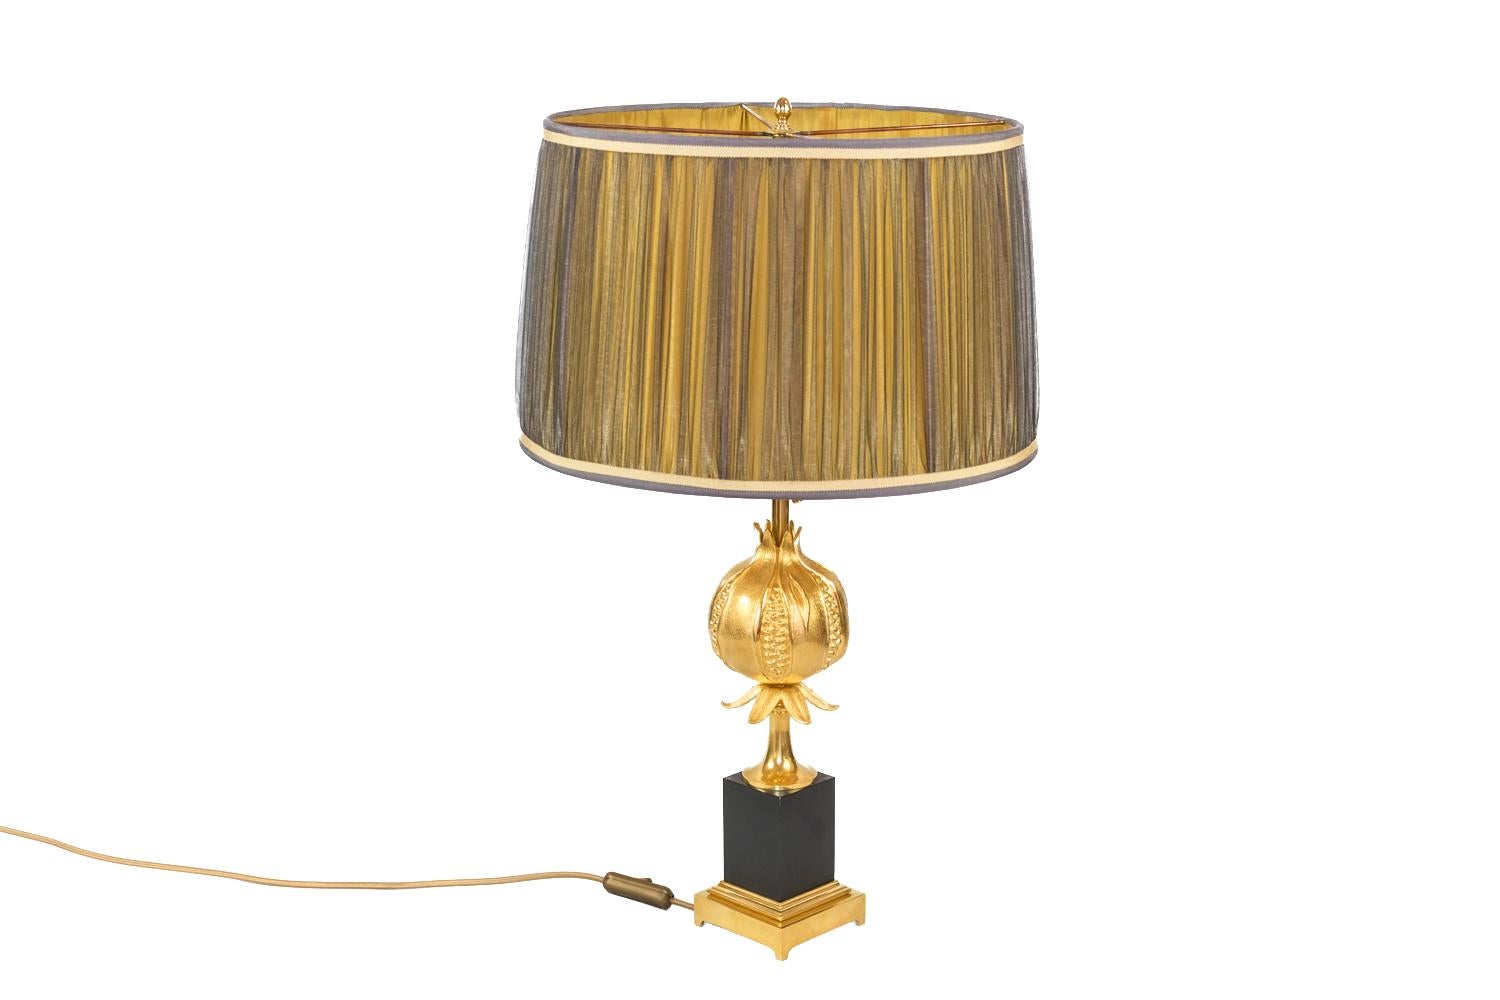 Pomegranate lamp in gilt bronze standing on a square moulded base in gilt bronze, topped by a cubic black bakelite pedestal. Shaft with a tulip base shape topped by a grenade opened in some areas.
Work of Maison Charles realized in the